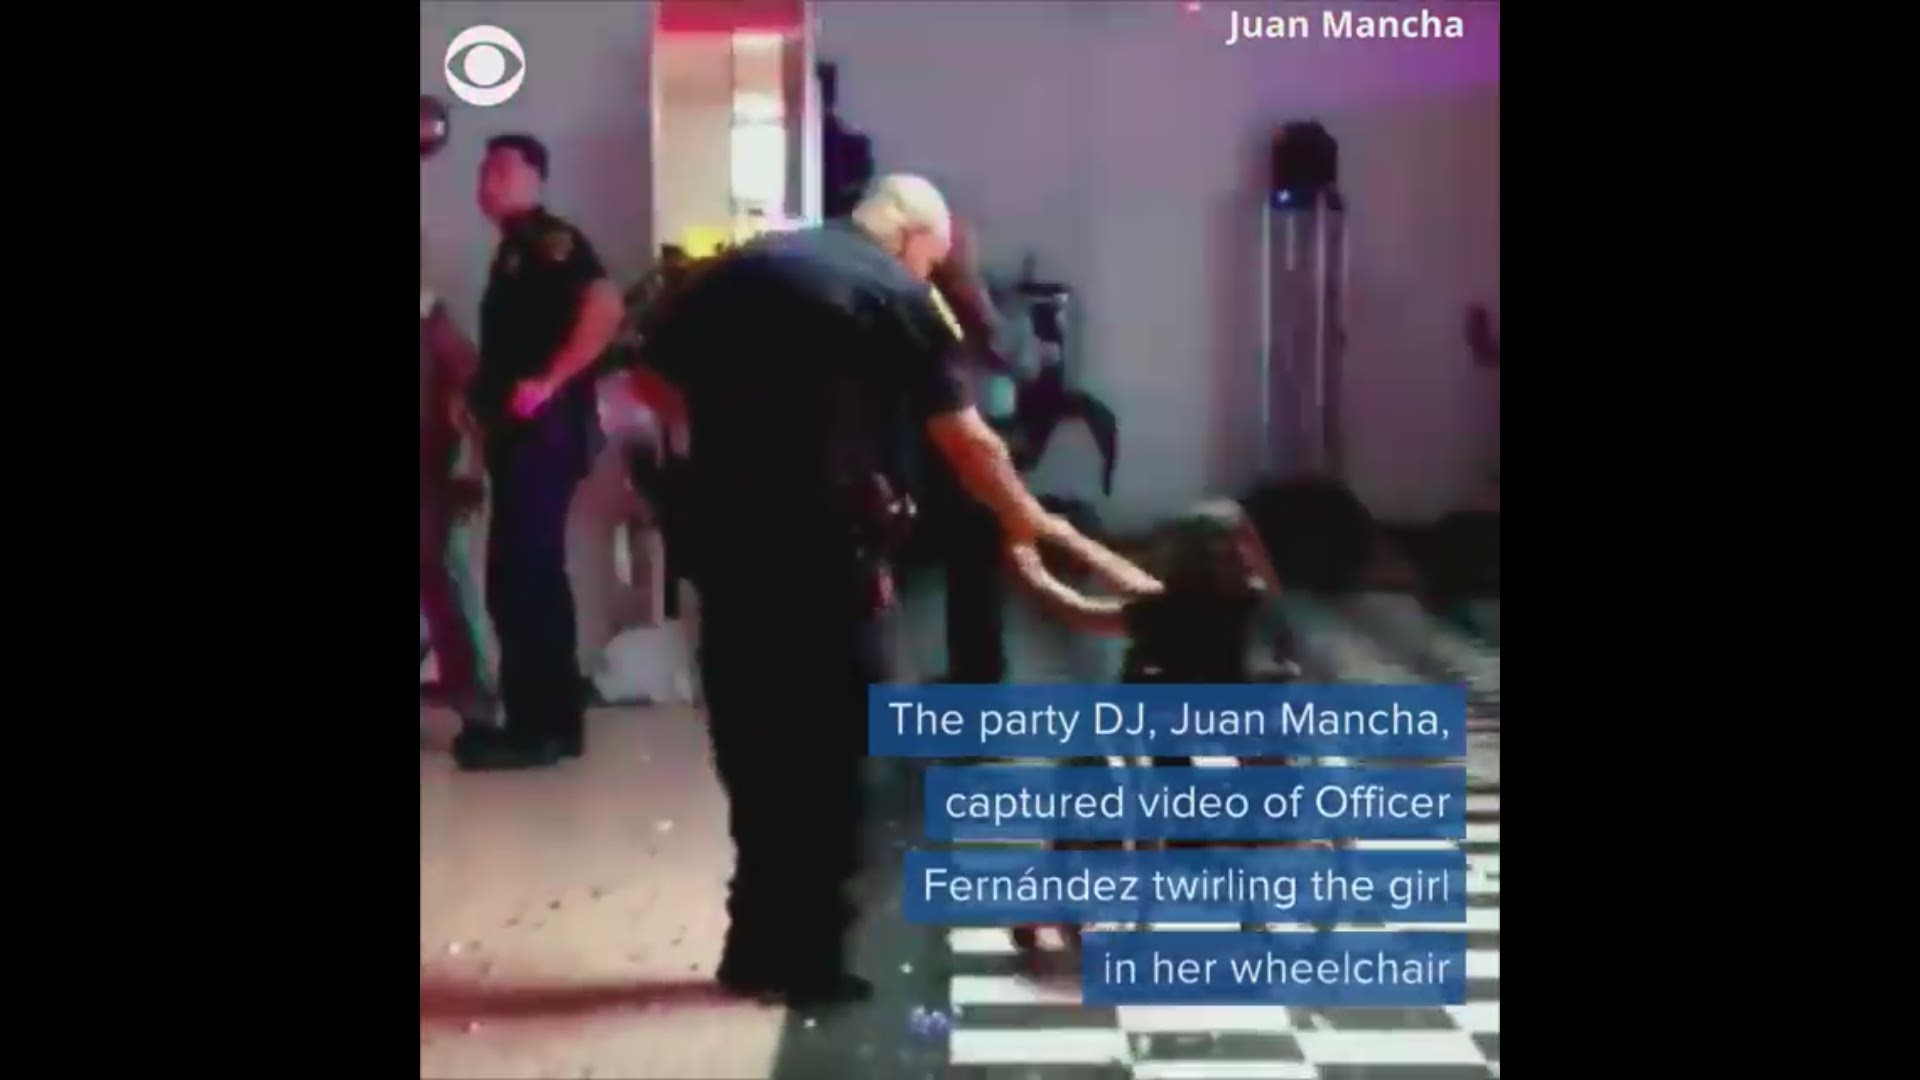 Houston Officer Fernandez says they danced for a few songs and she never stopped smiling. The DJ at the party, Juan Mancha, took video of the dancing duo